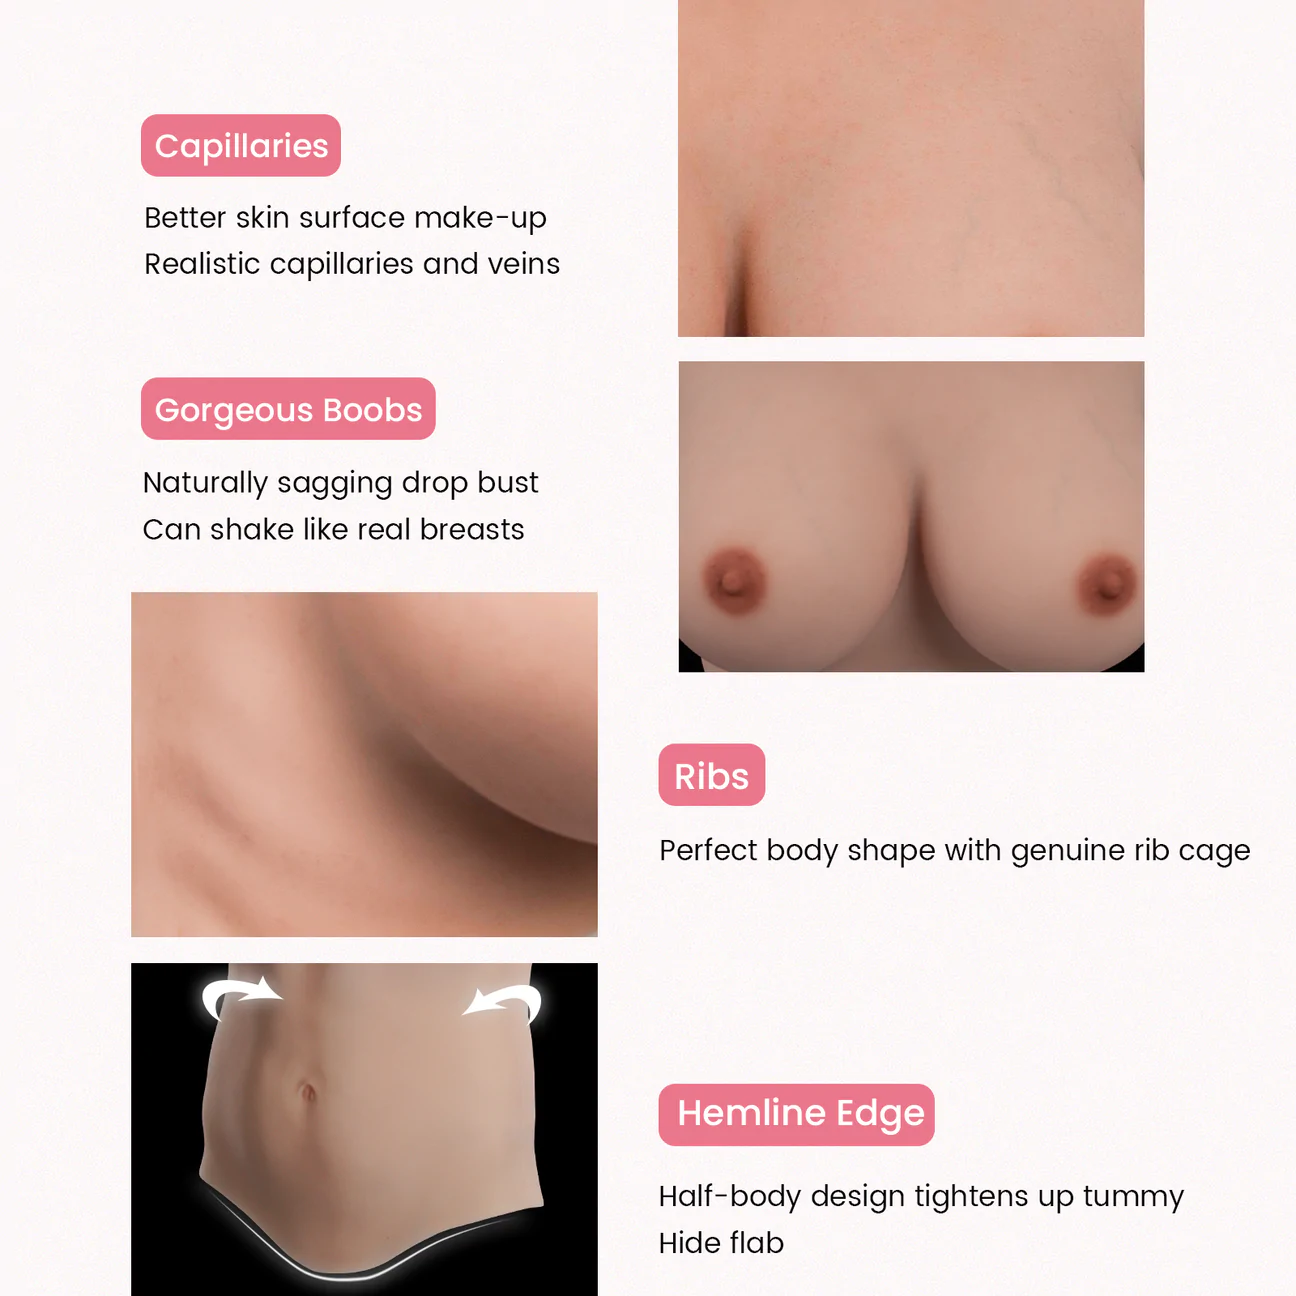 Silicone Highest Breast with airbag 8G